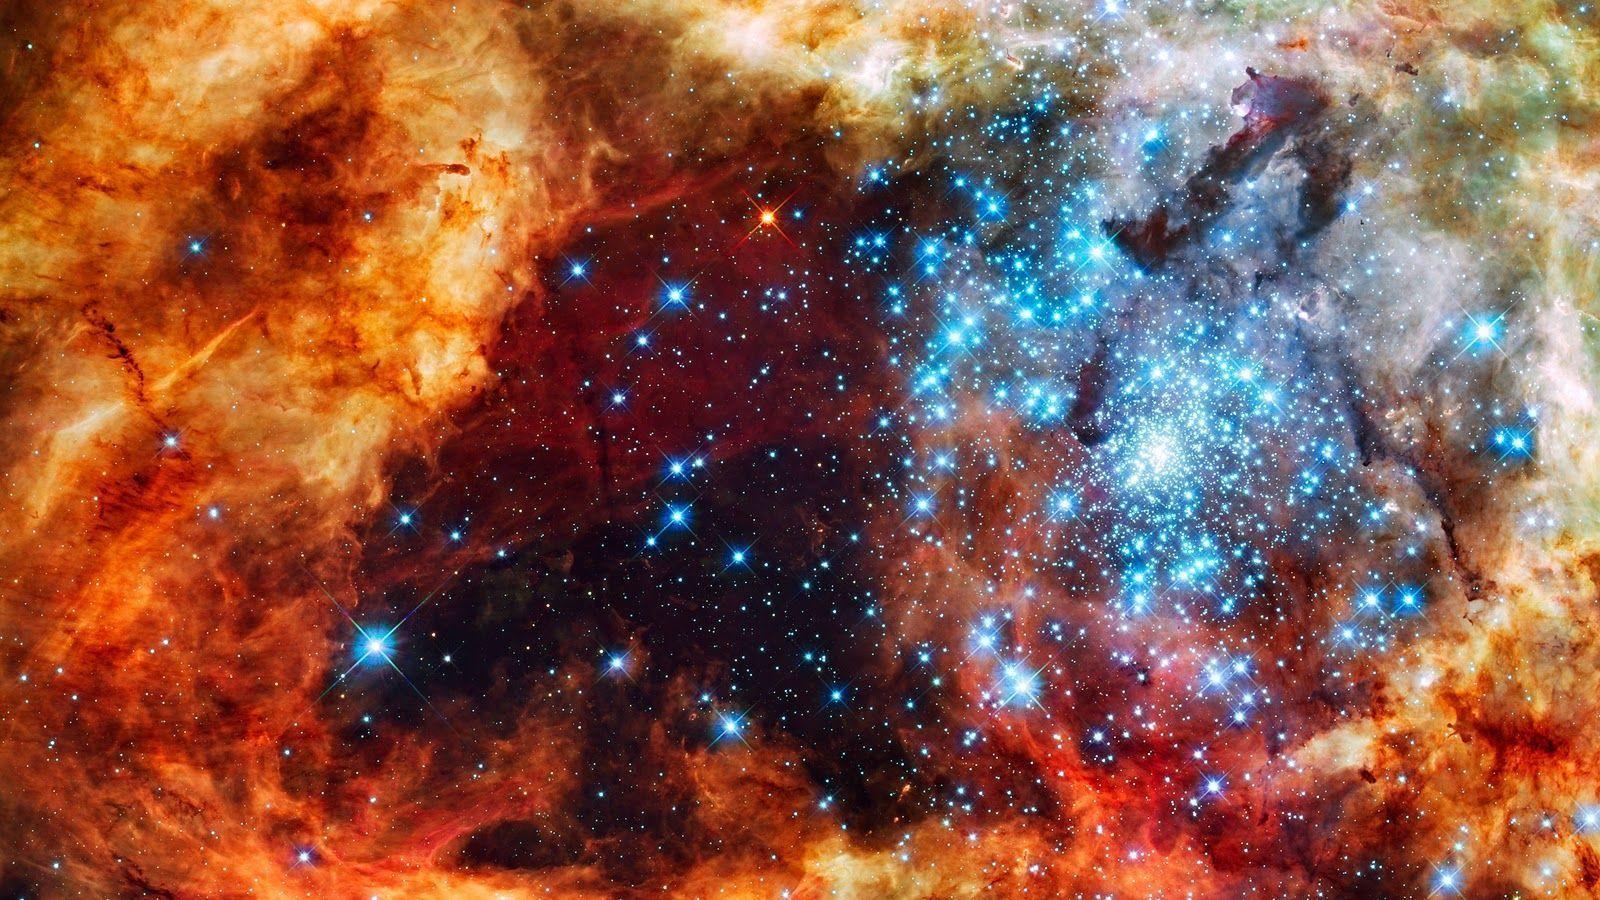 image For > Hubble Space Telescope Wallpaper